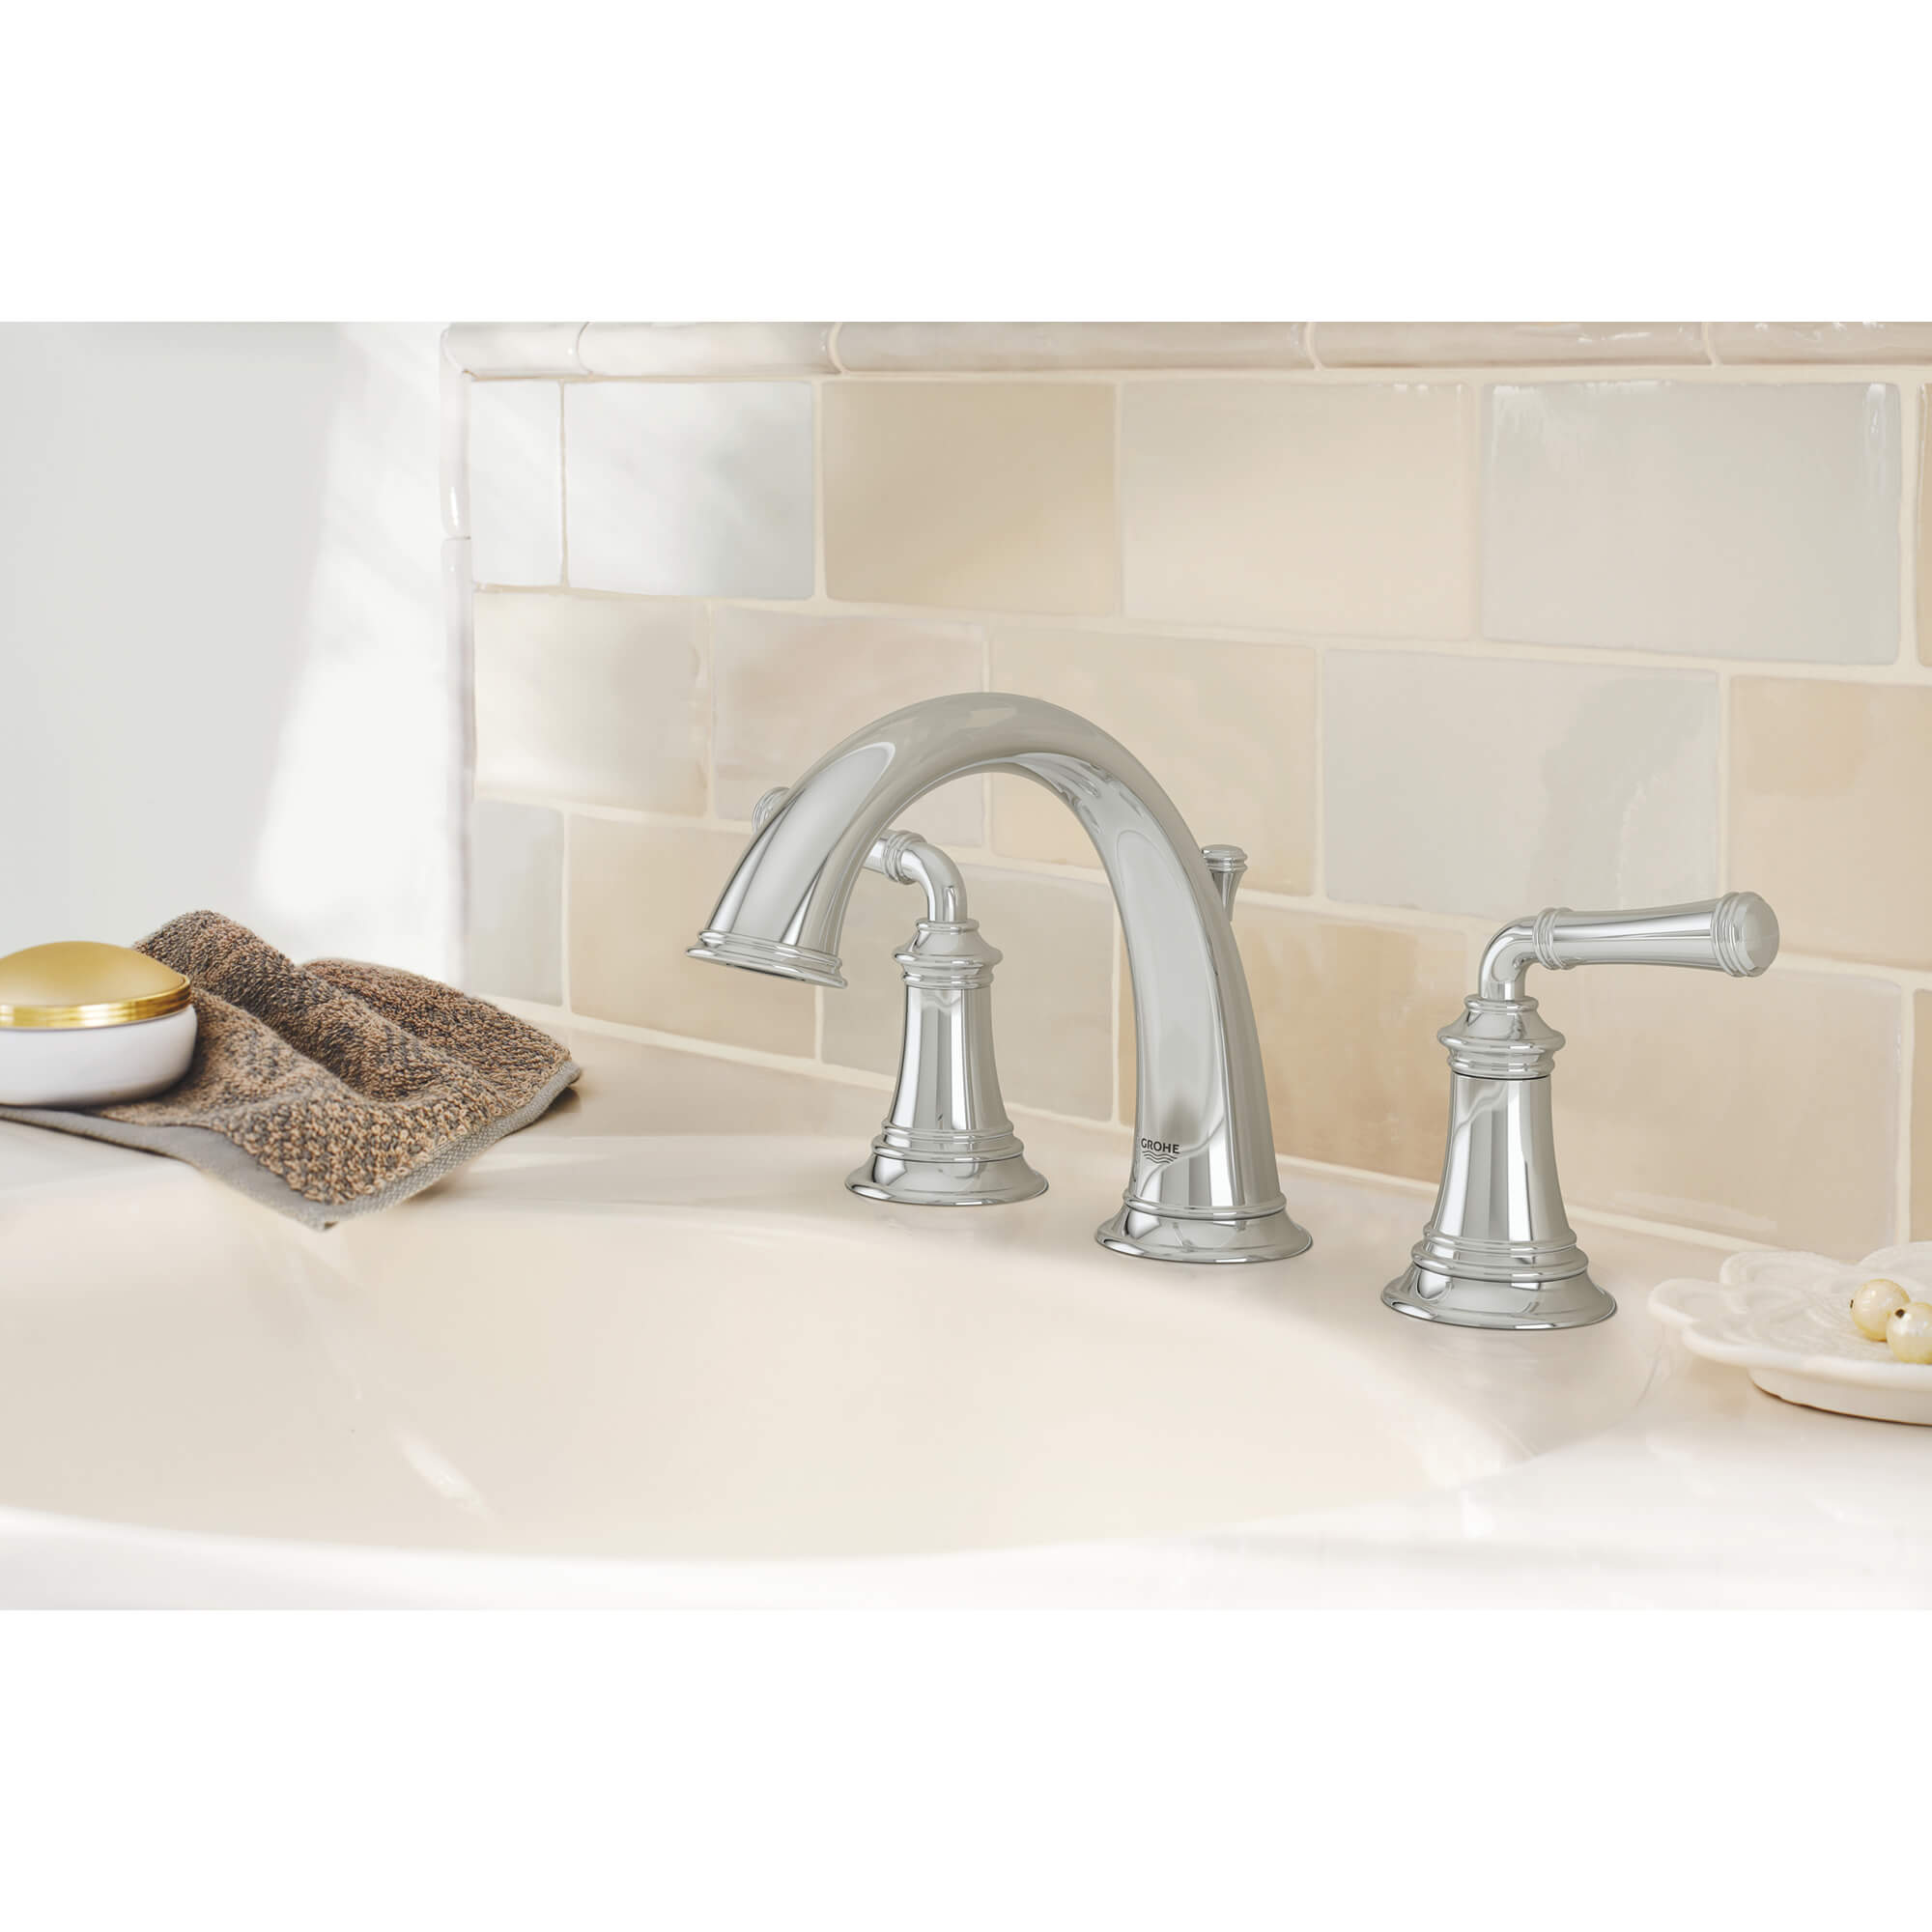 8 Inch Widespread 2 Handle S Size Bathroom Faucet 1 2 Gpm